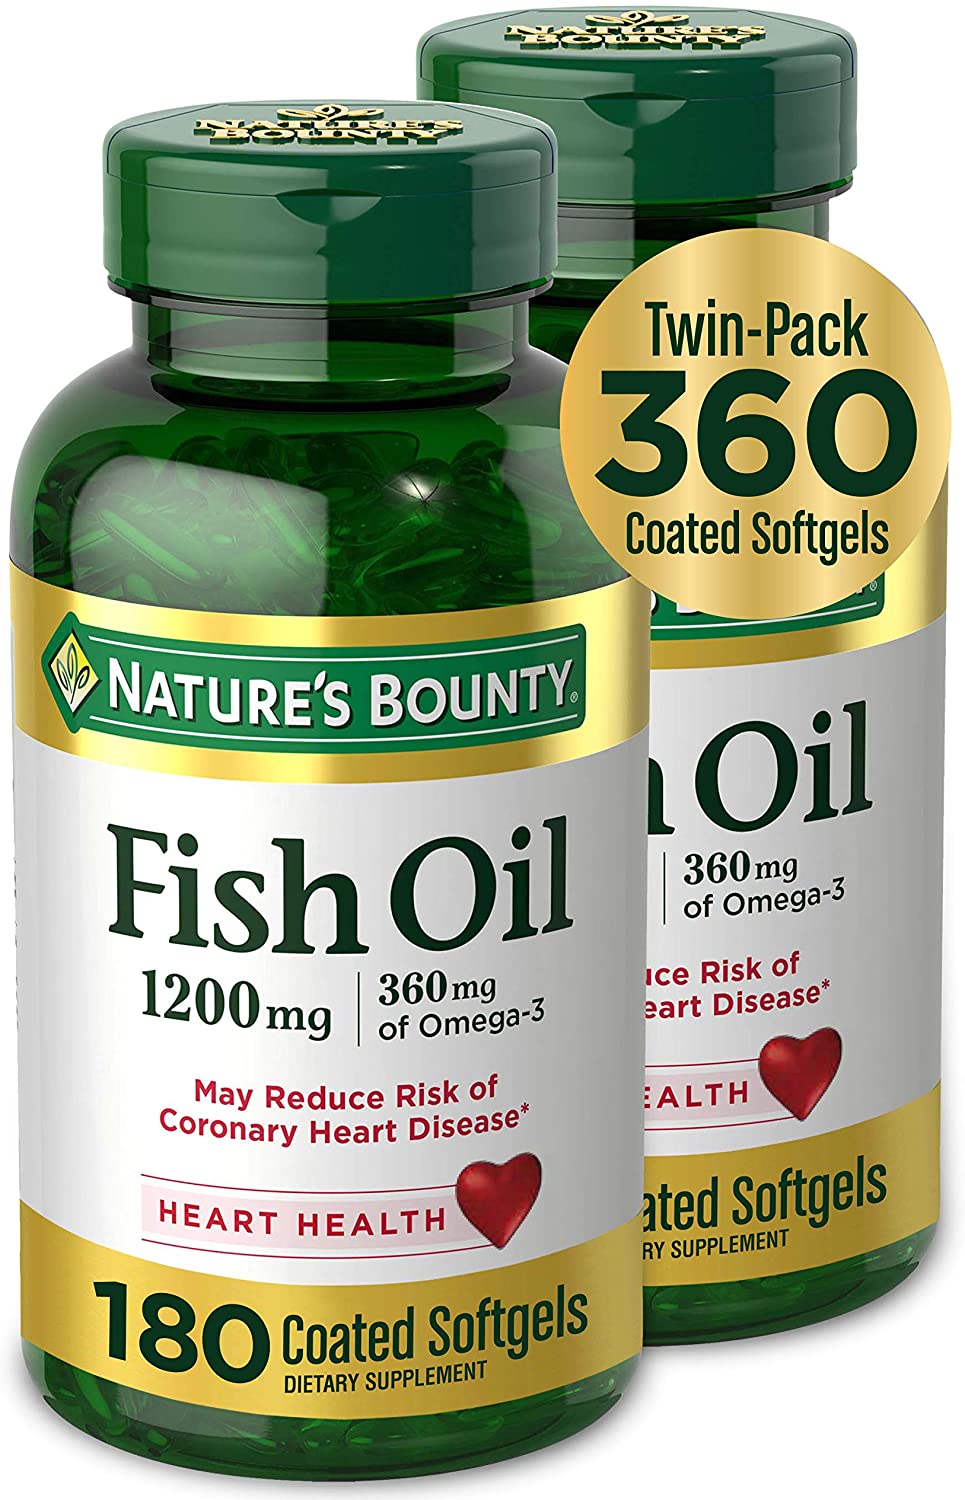 Nature's Bounty, Fish Oil 1200 mg Twin Packs, 360 Softgels $12.21 S&S